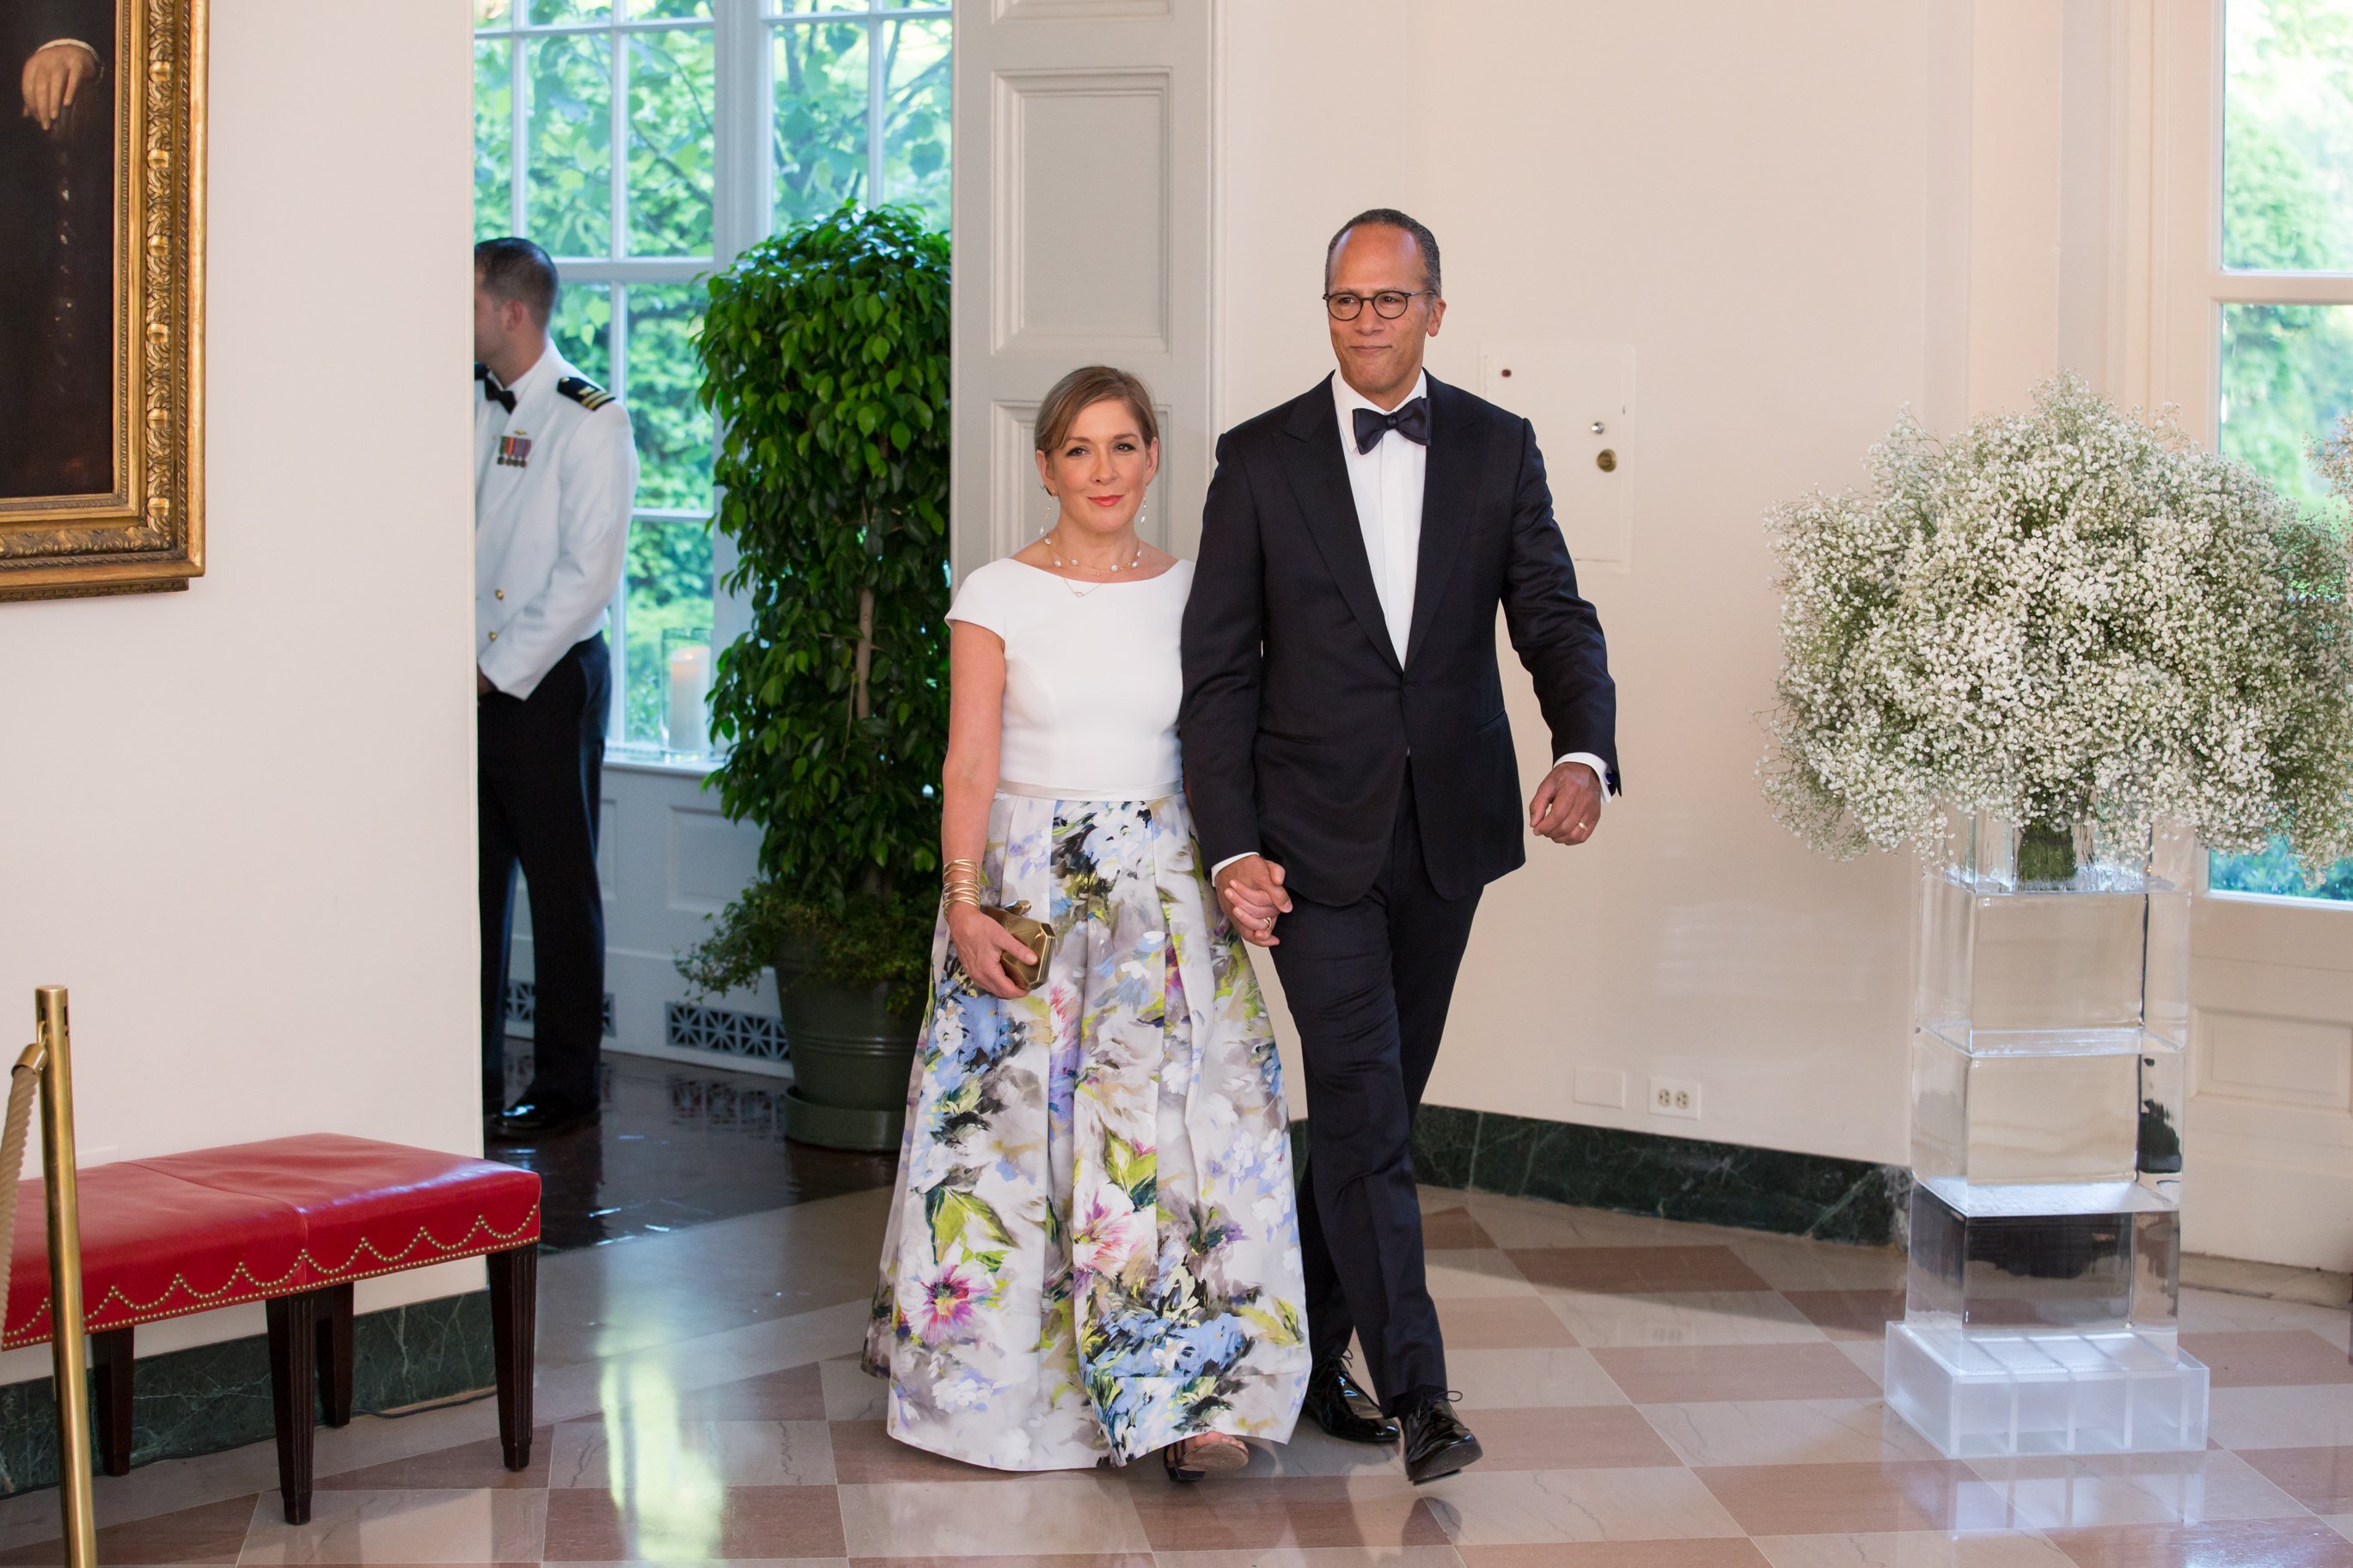 Lester Holt and his wife, Carol Hagen-Holt, arrive for the Nordic State Dinner on Friday, May 13 2015 at the White House | Source: Getty Images